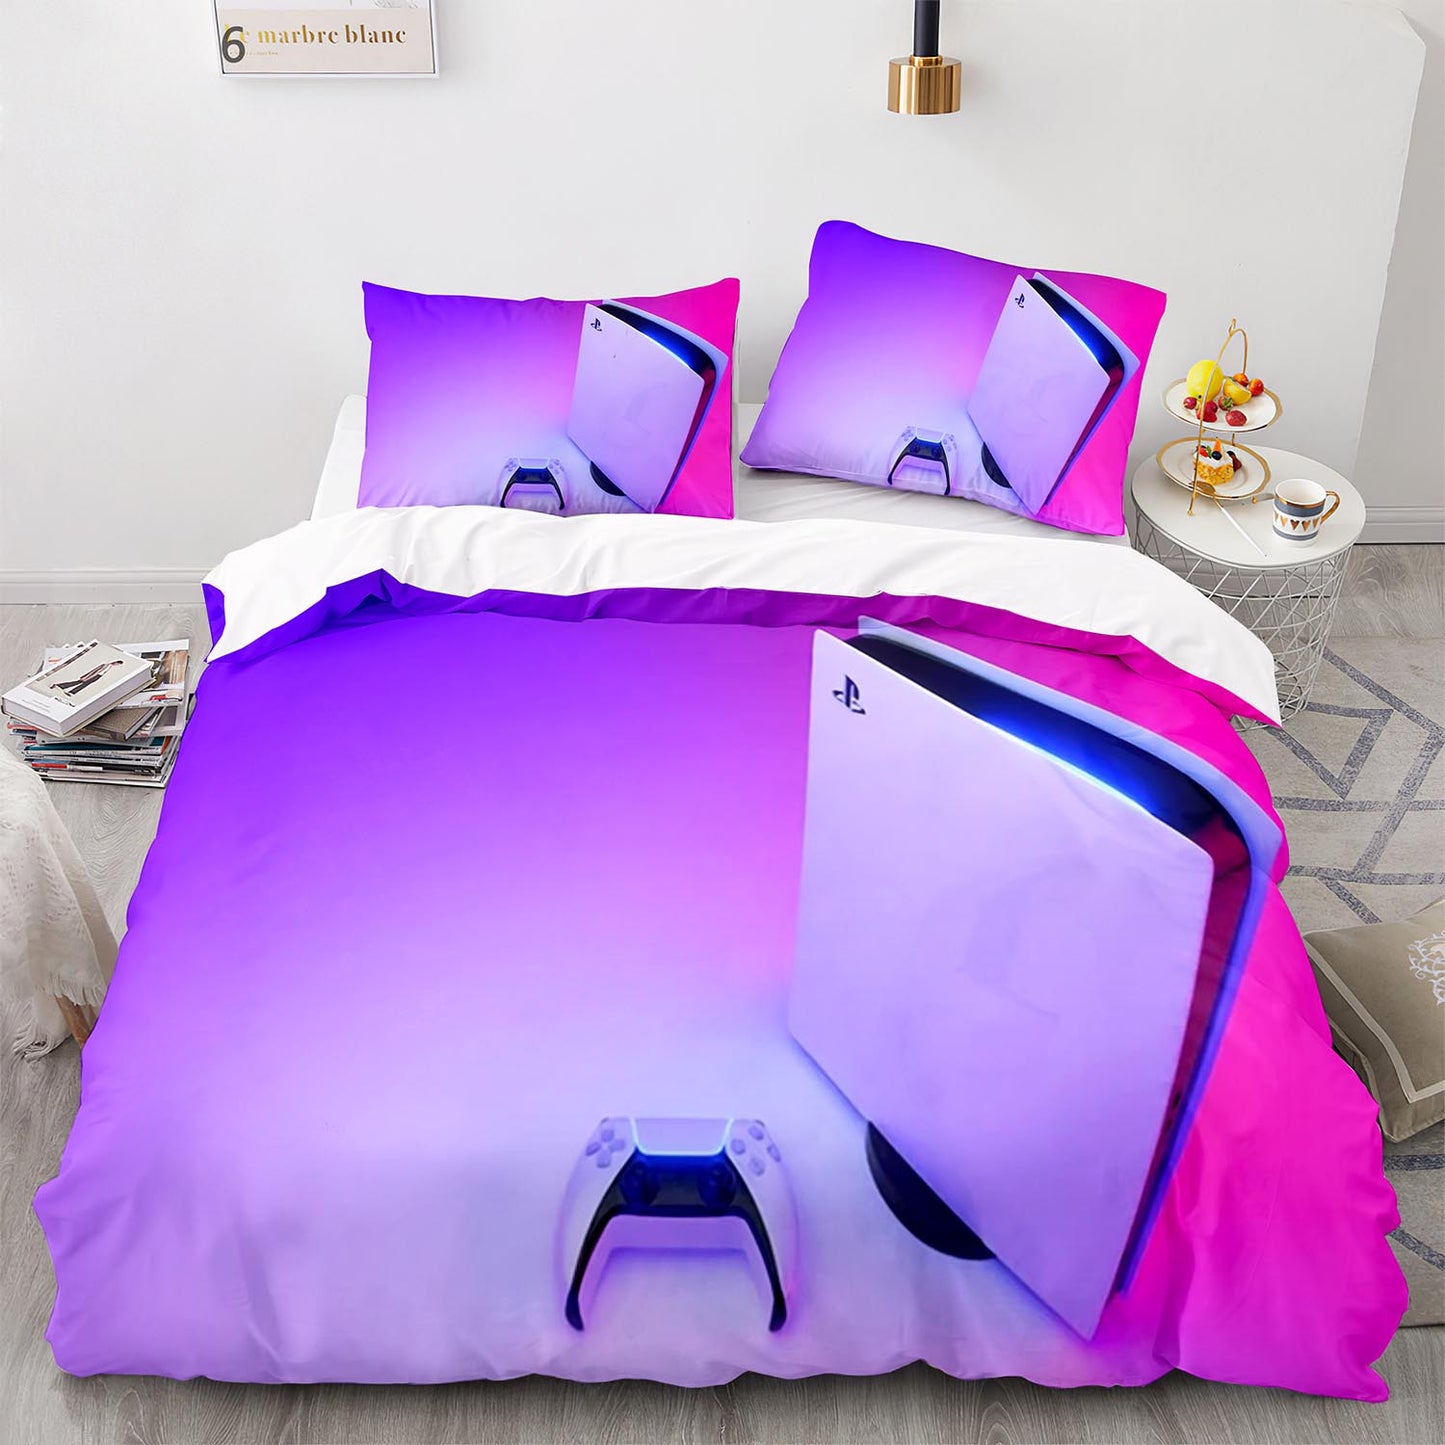 Customize Photo Logo Duvet Cover Boys Girls Adults Gift Custom Made DIY Bedding Set Designer Bed Set Queen Size Quilt Cover  PS1048